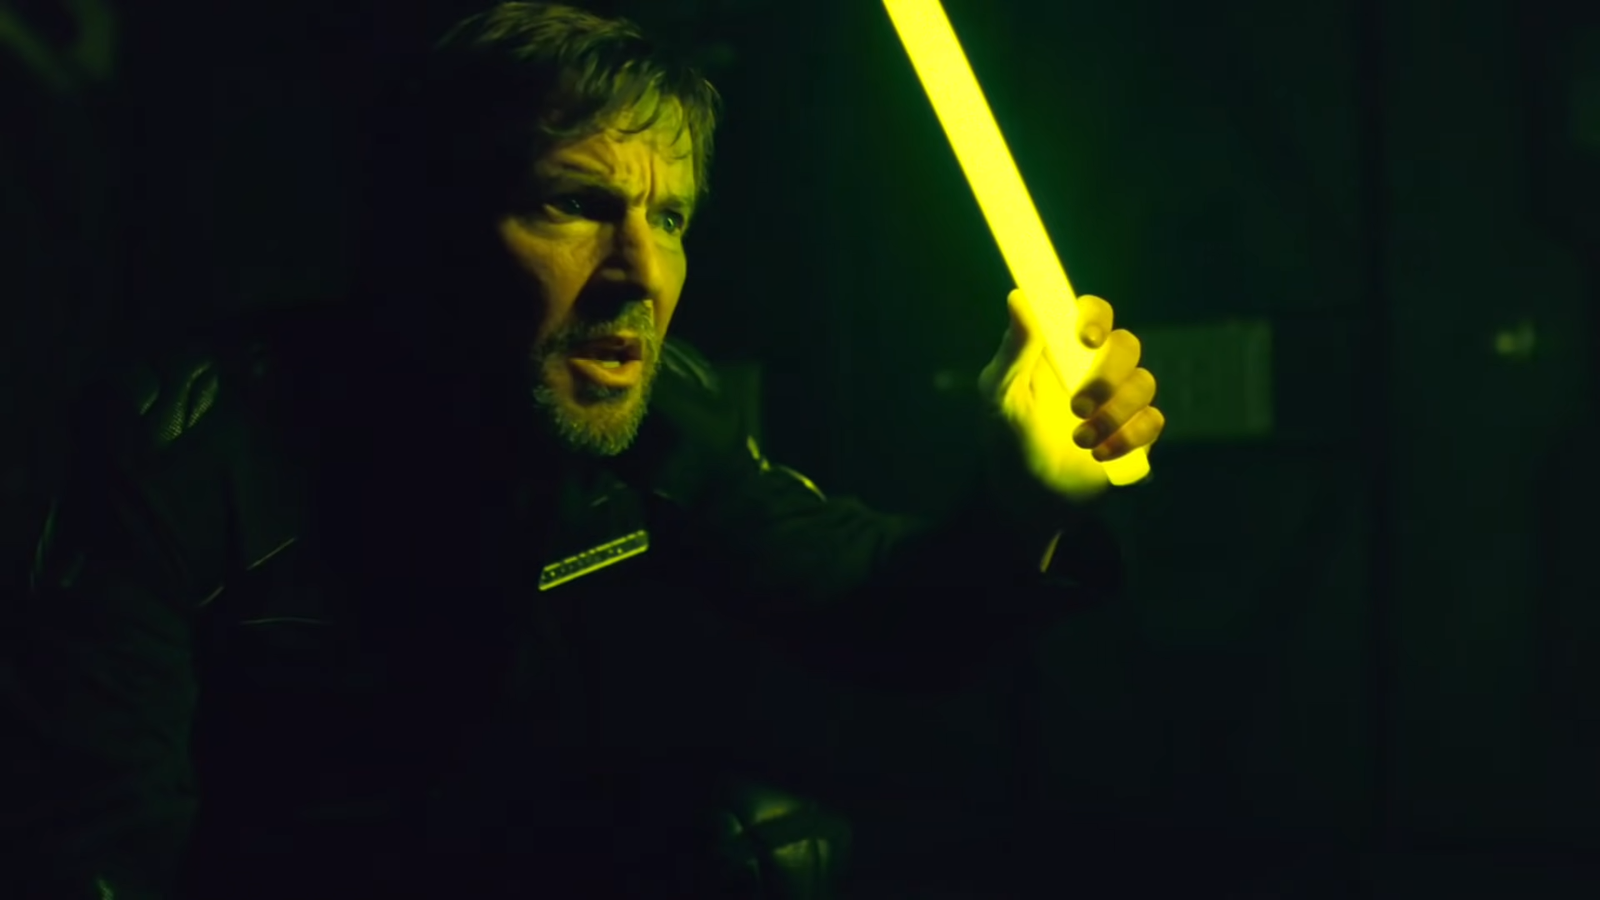 character holds a glowing nightstick in the dark